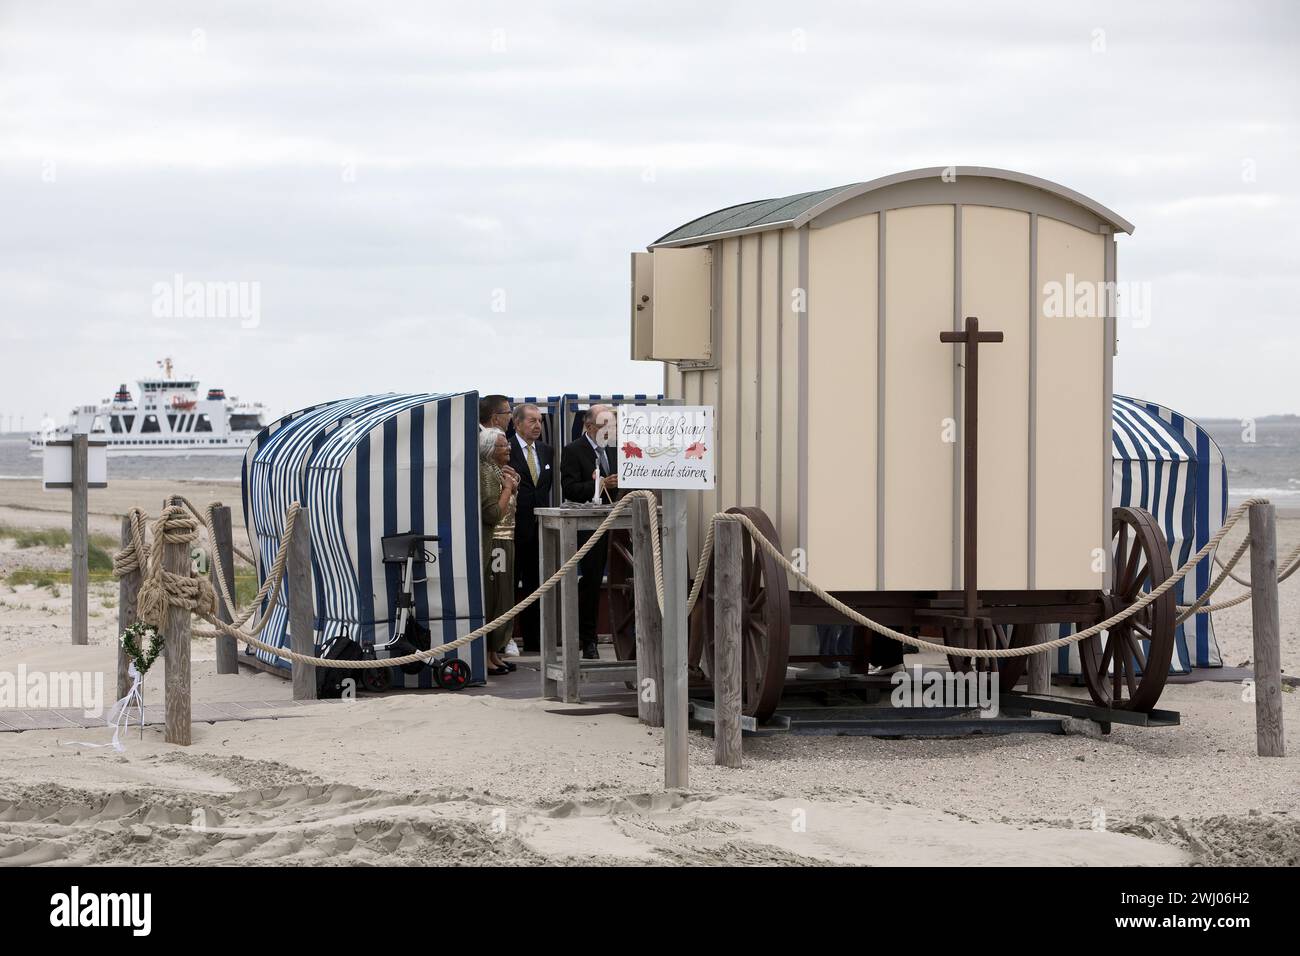 Civil wedding in a bathing cart, Norderney Island, East Frisia, Lower Saxony, Germany, Europe Stock Photo